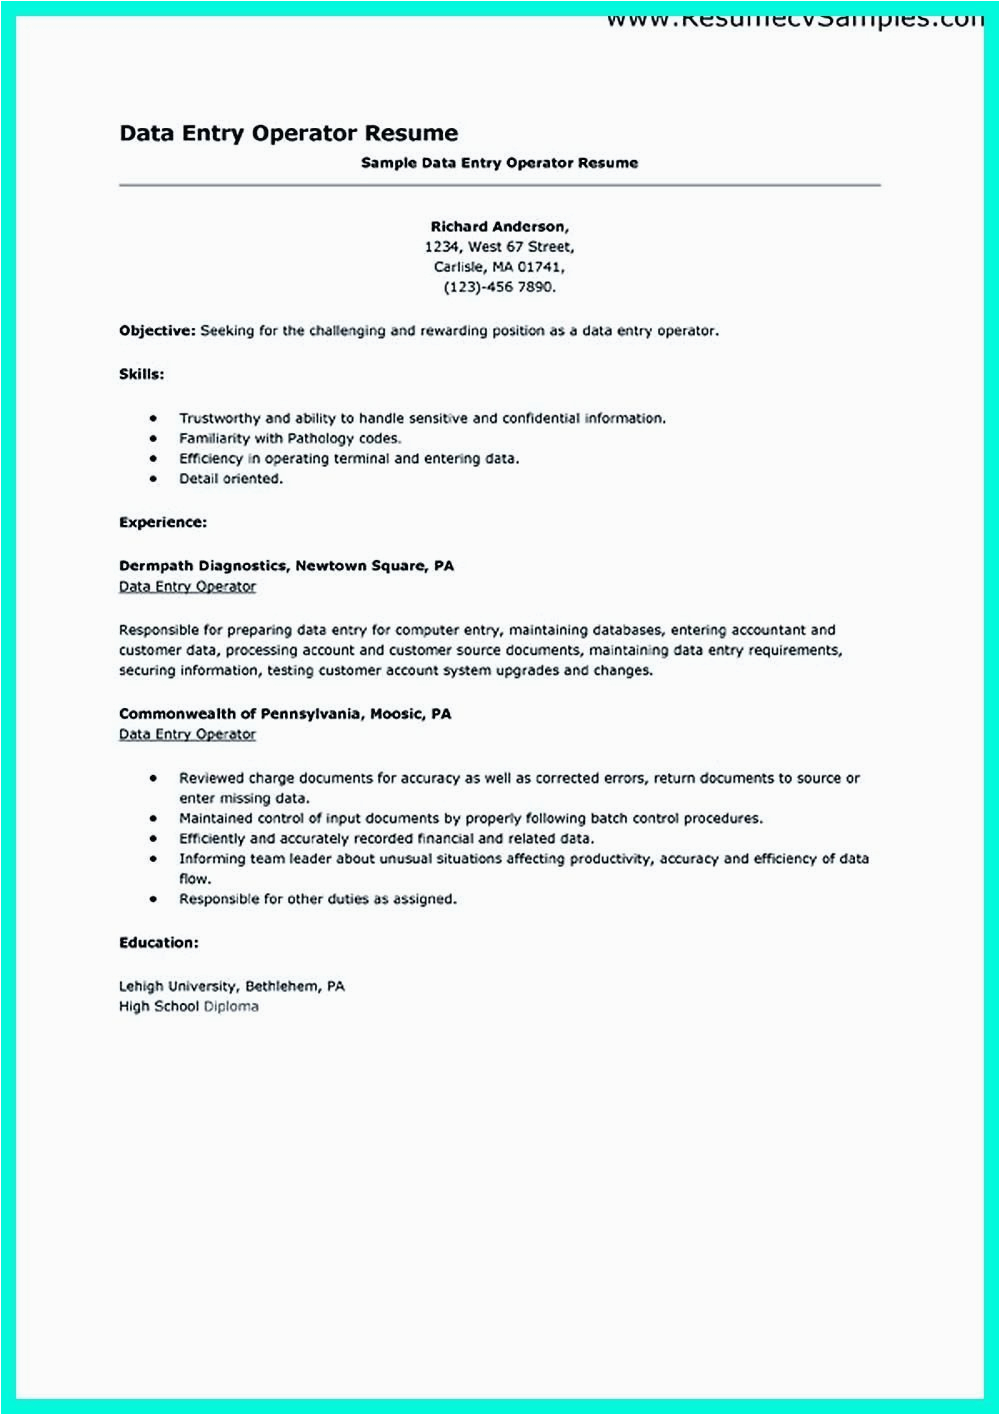 Resume Cover Letter Samples for Data Entry Your Data Entry Resume is the Essential Marketing Key to the Job